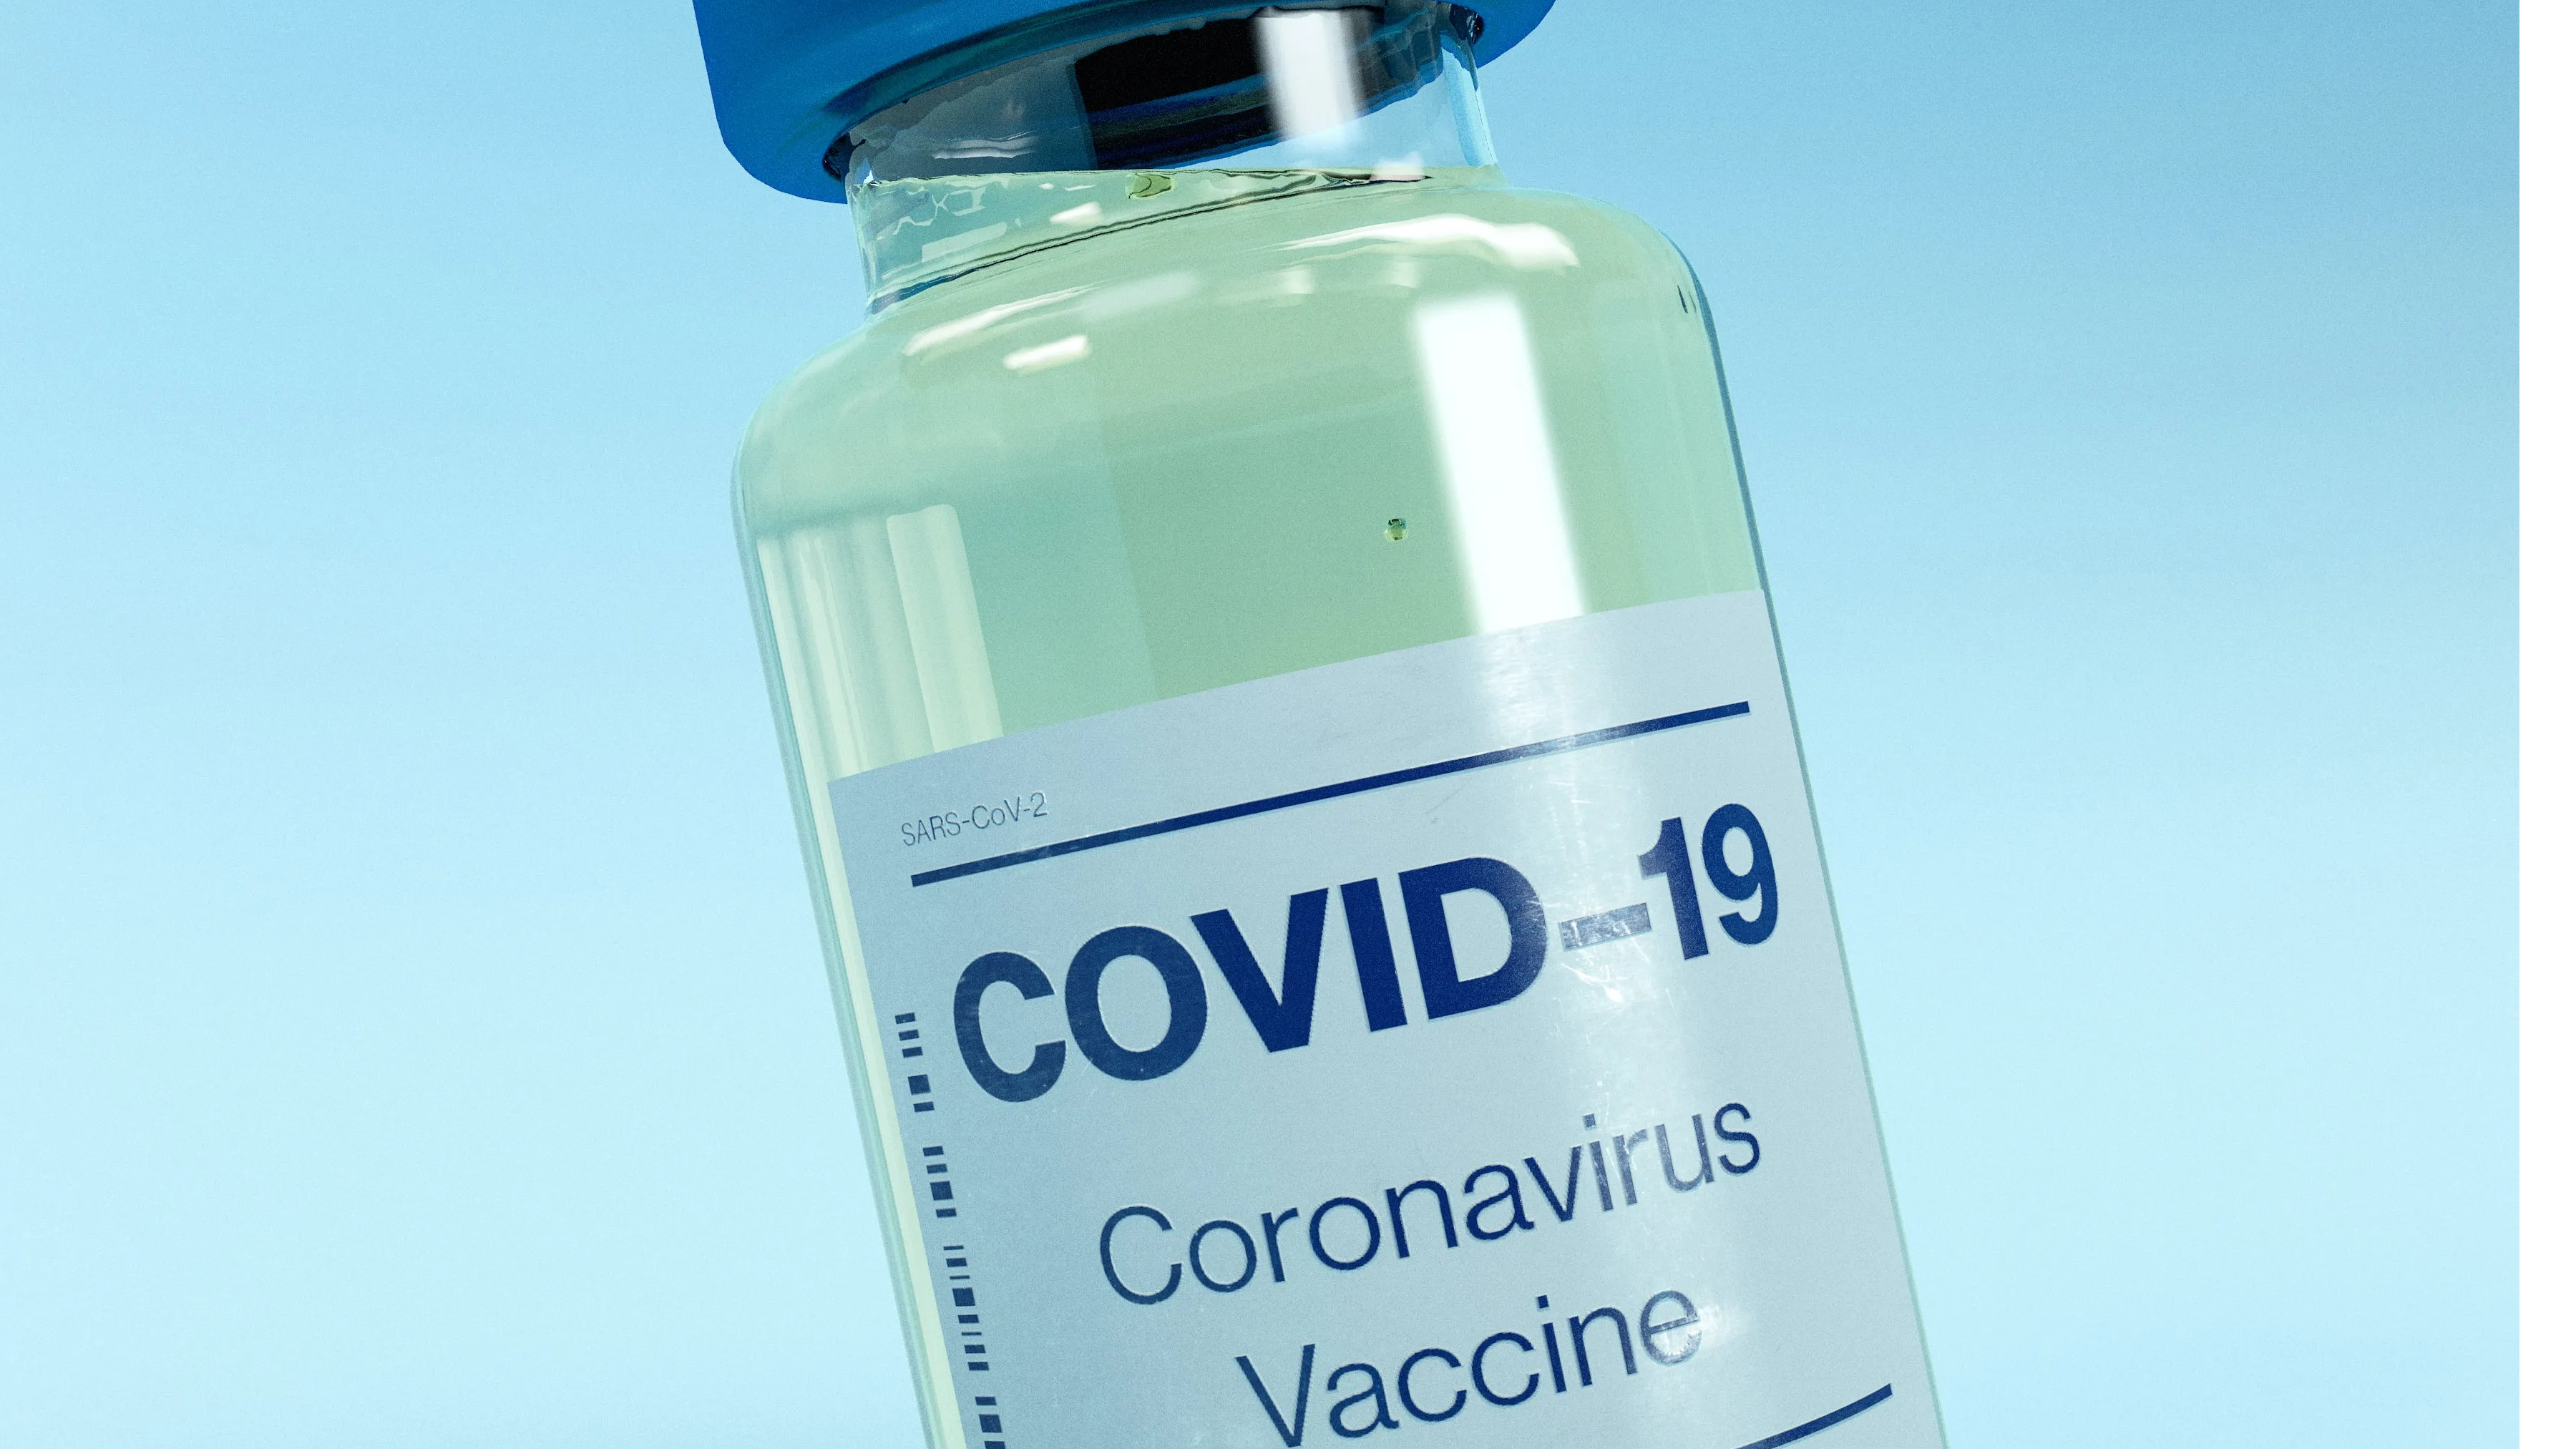 US frontline workers are entitled to first COVID-19 vaccines, says CDC